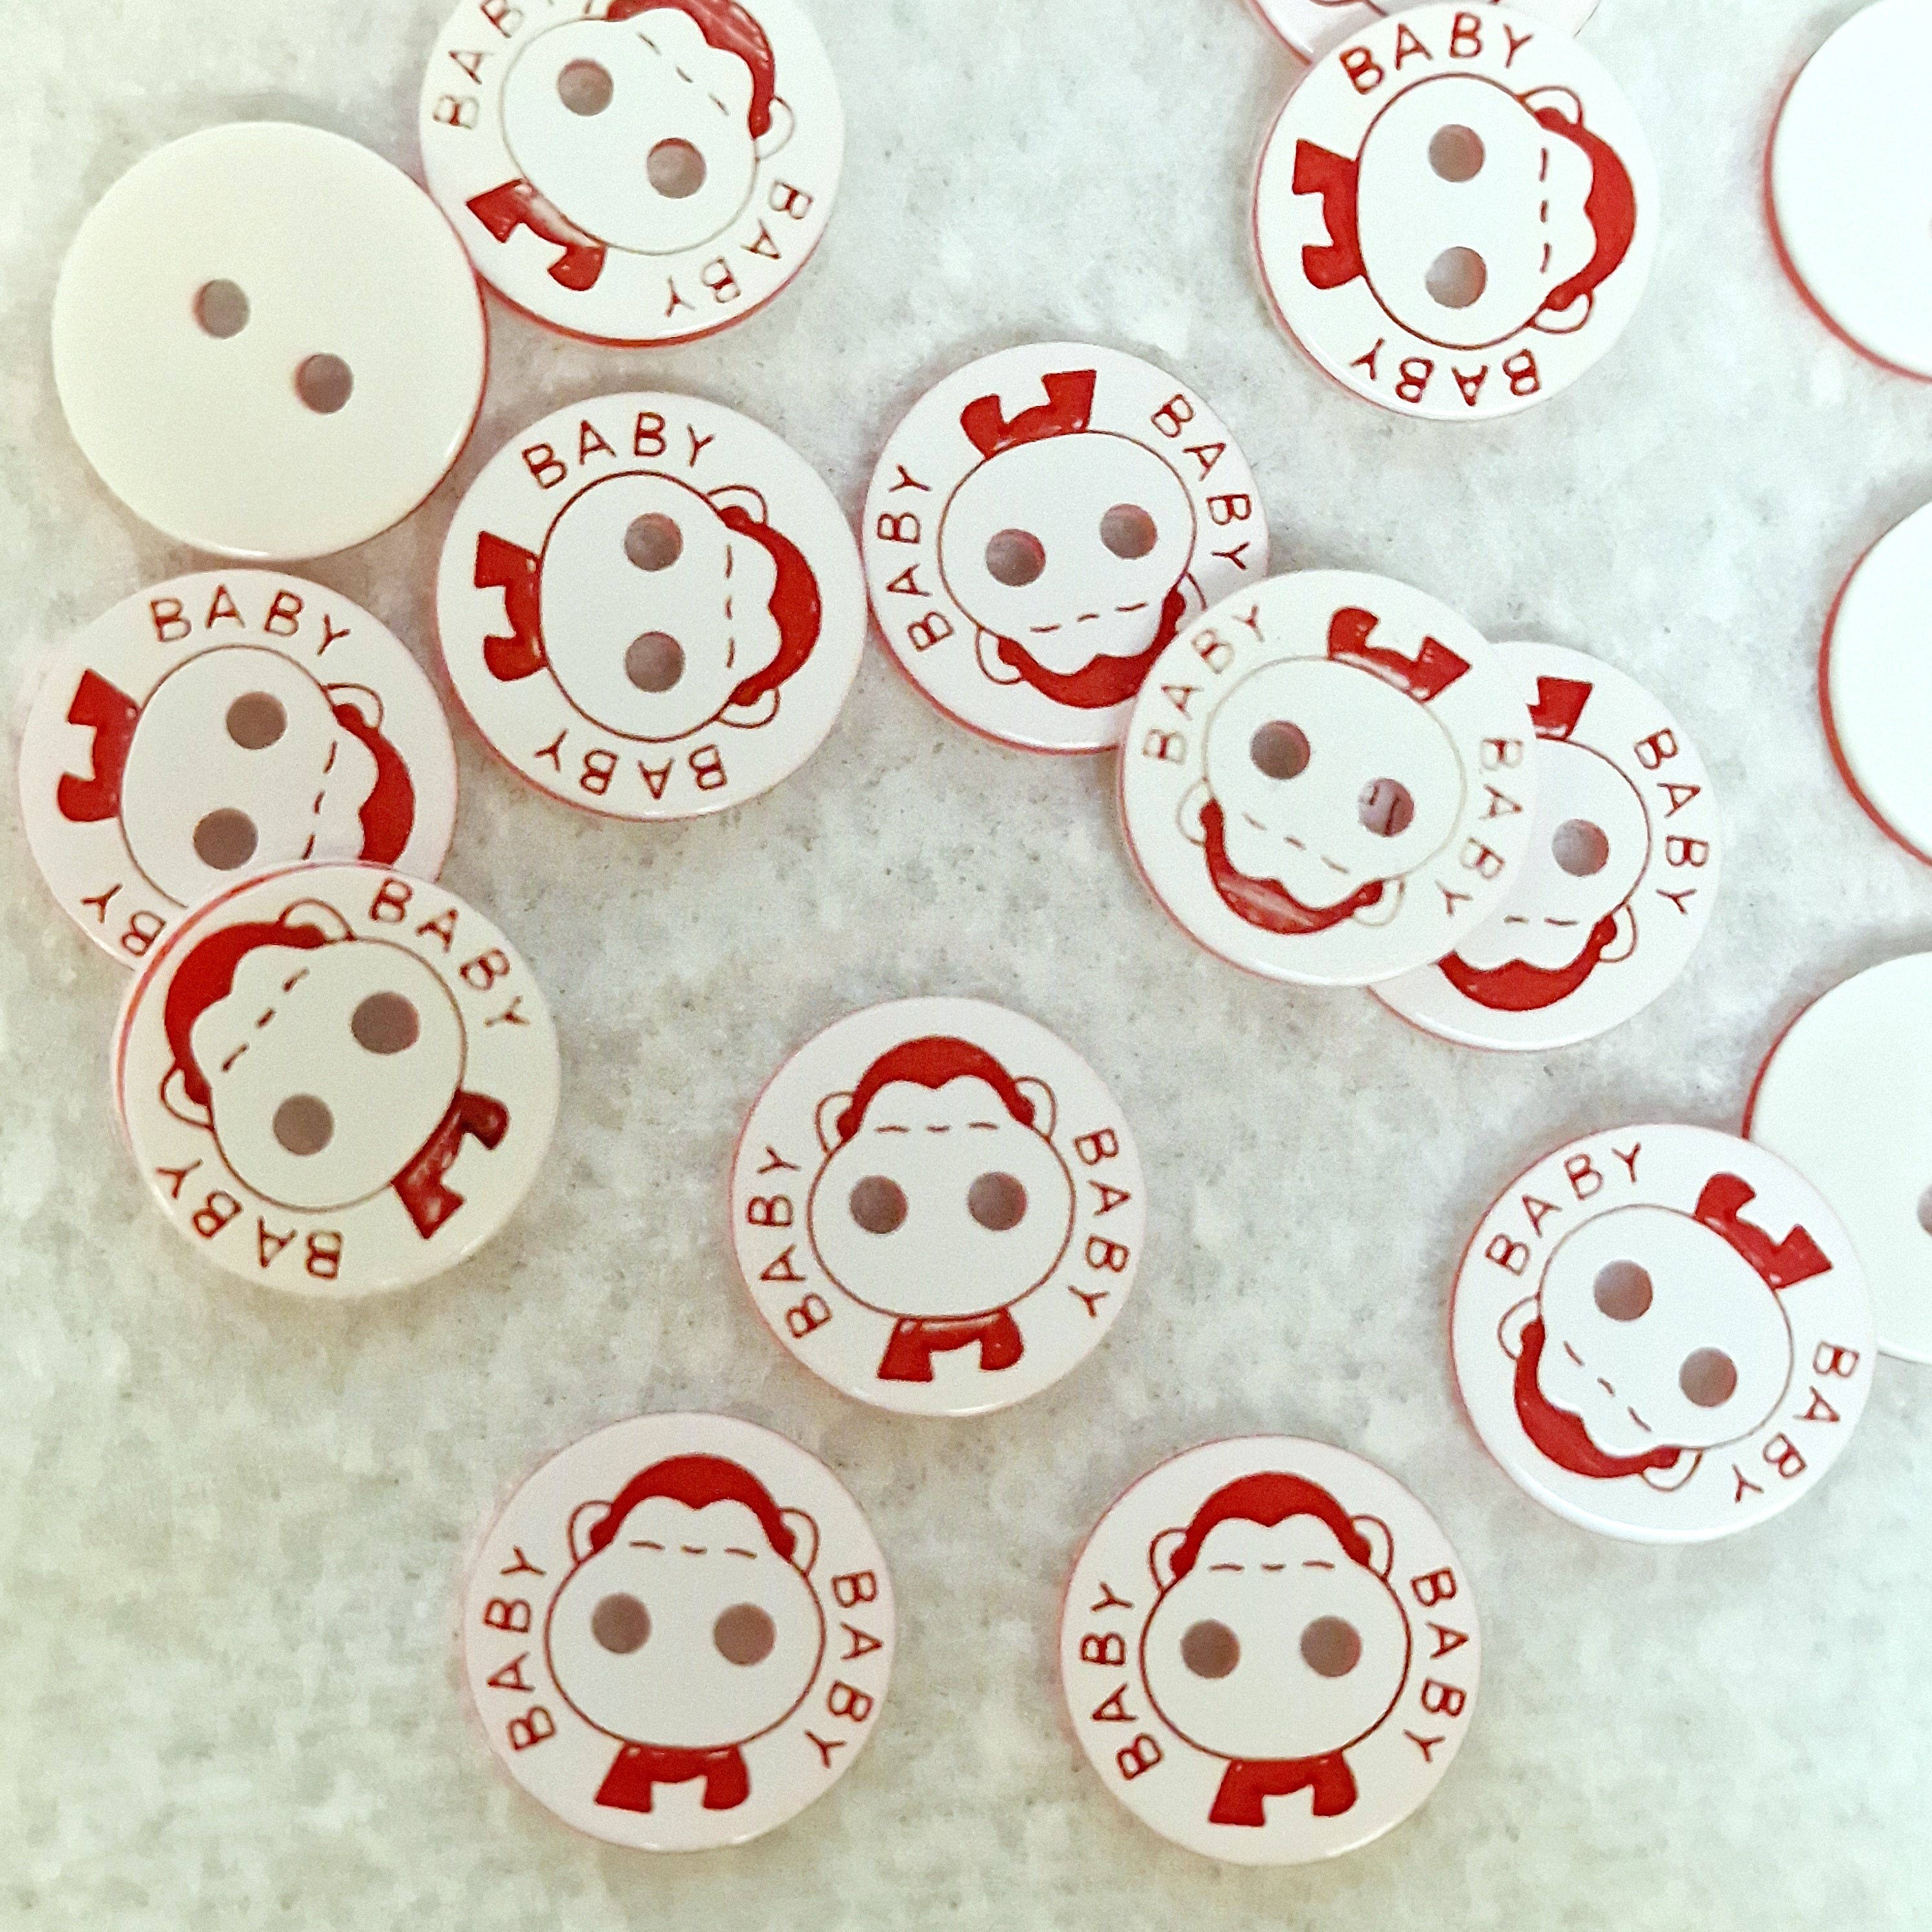 MajorCrafts 48pcs 12.5mm Red & White 'Baby' Printed 2 Holes Small Round Resin Sewing Buttons